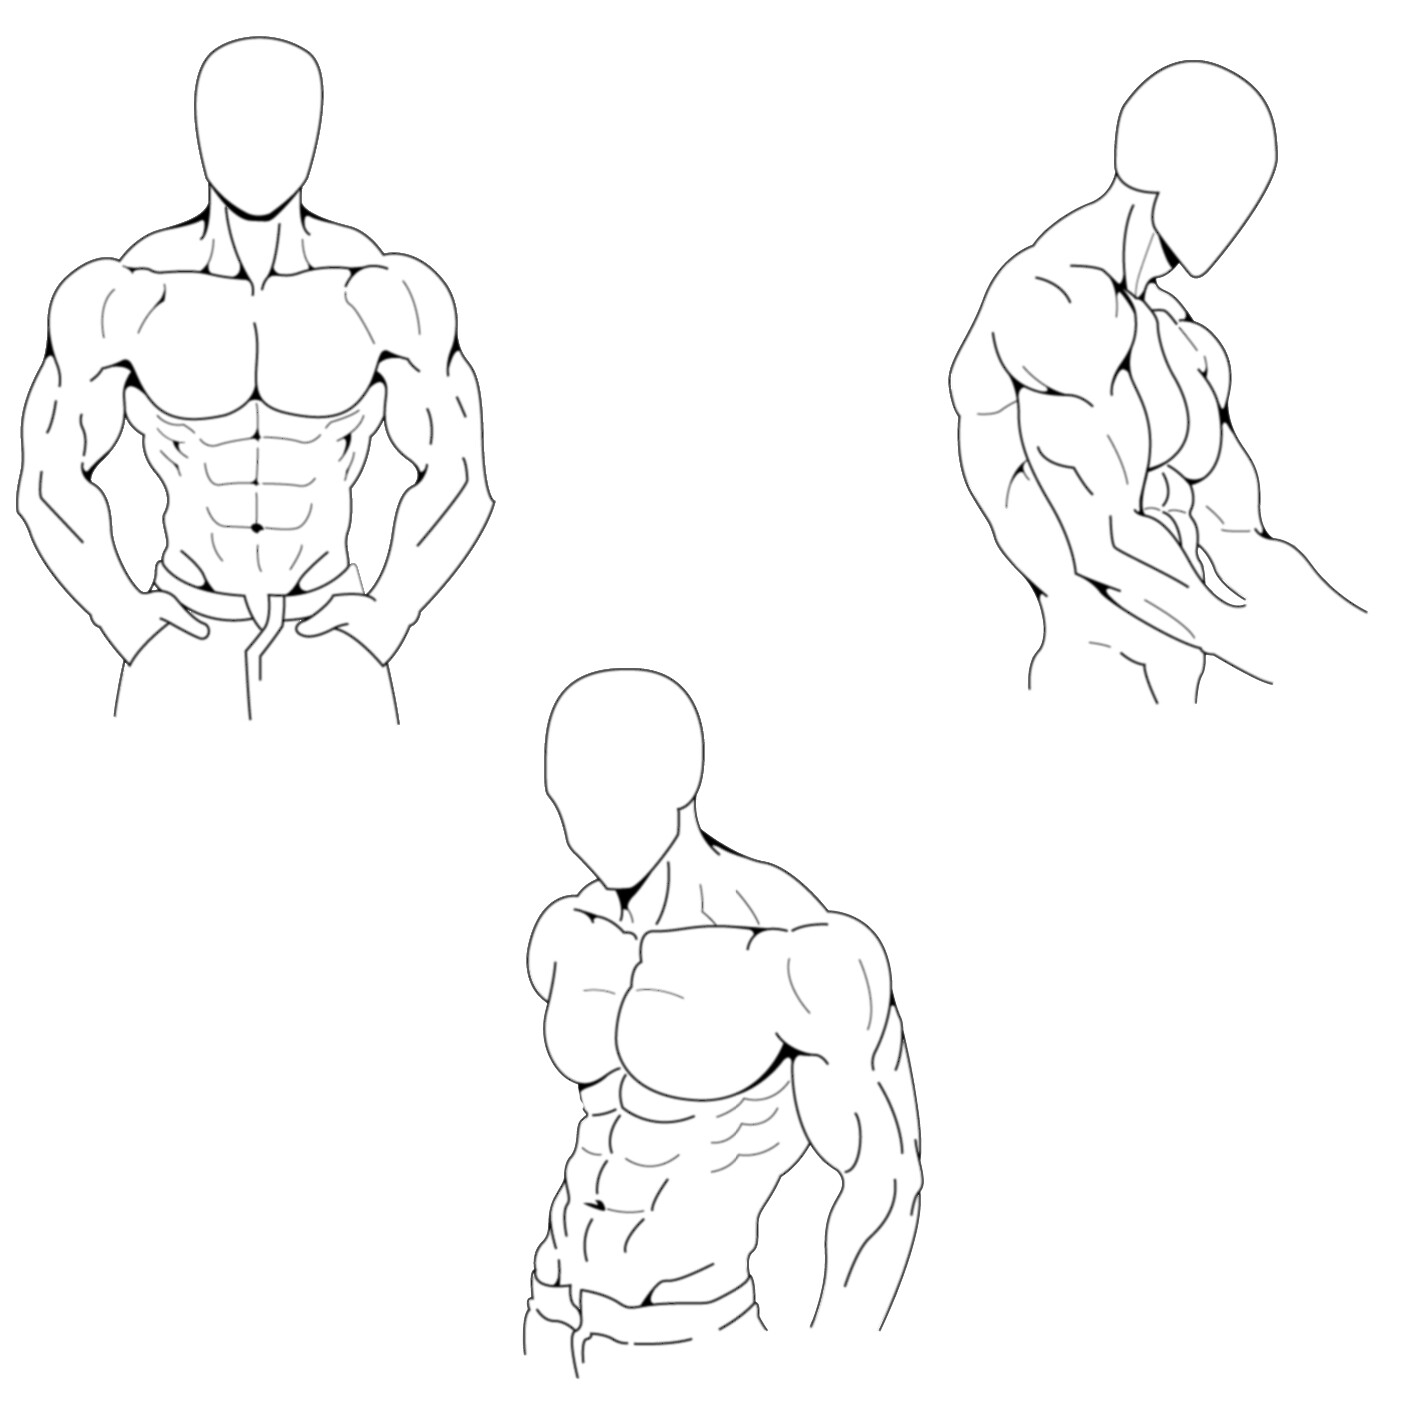 Body Outline Drawing Sketch - Drawing Skill